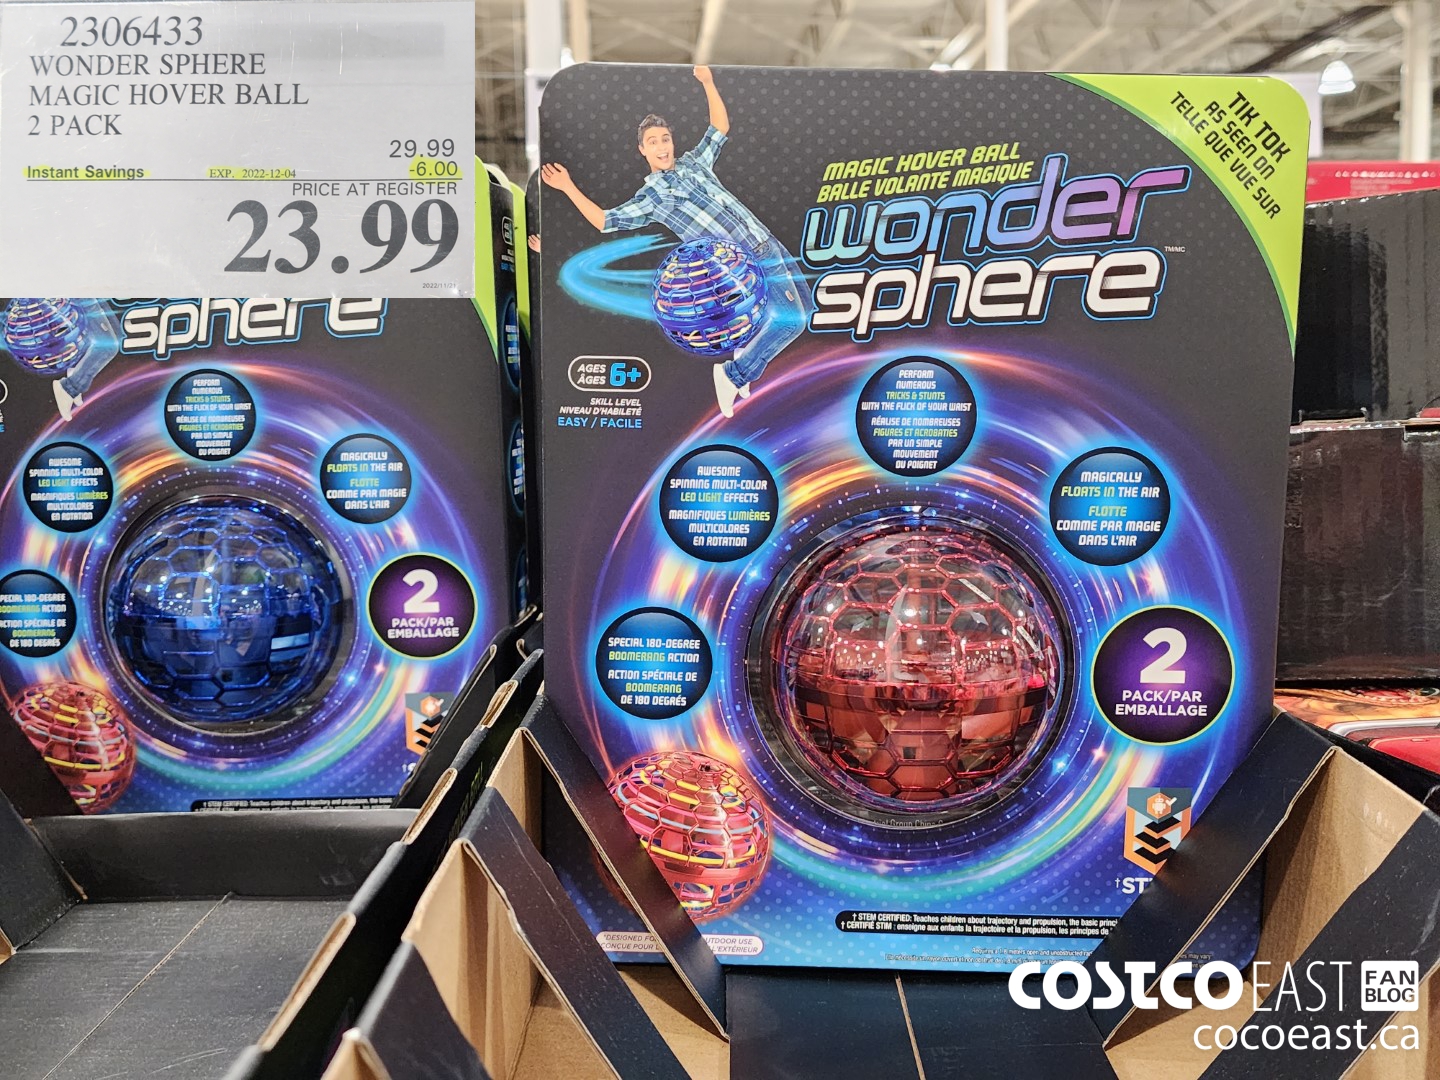 2306433 WONDER SPHERE MAGIC HOVER BALL 2 PACK 6 00 INSTANT SAVINGS EXPIRES  ON 2022 12 04 23 99 - Costco East Fan Blog